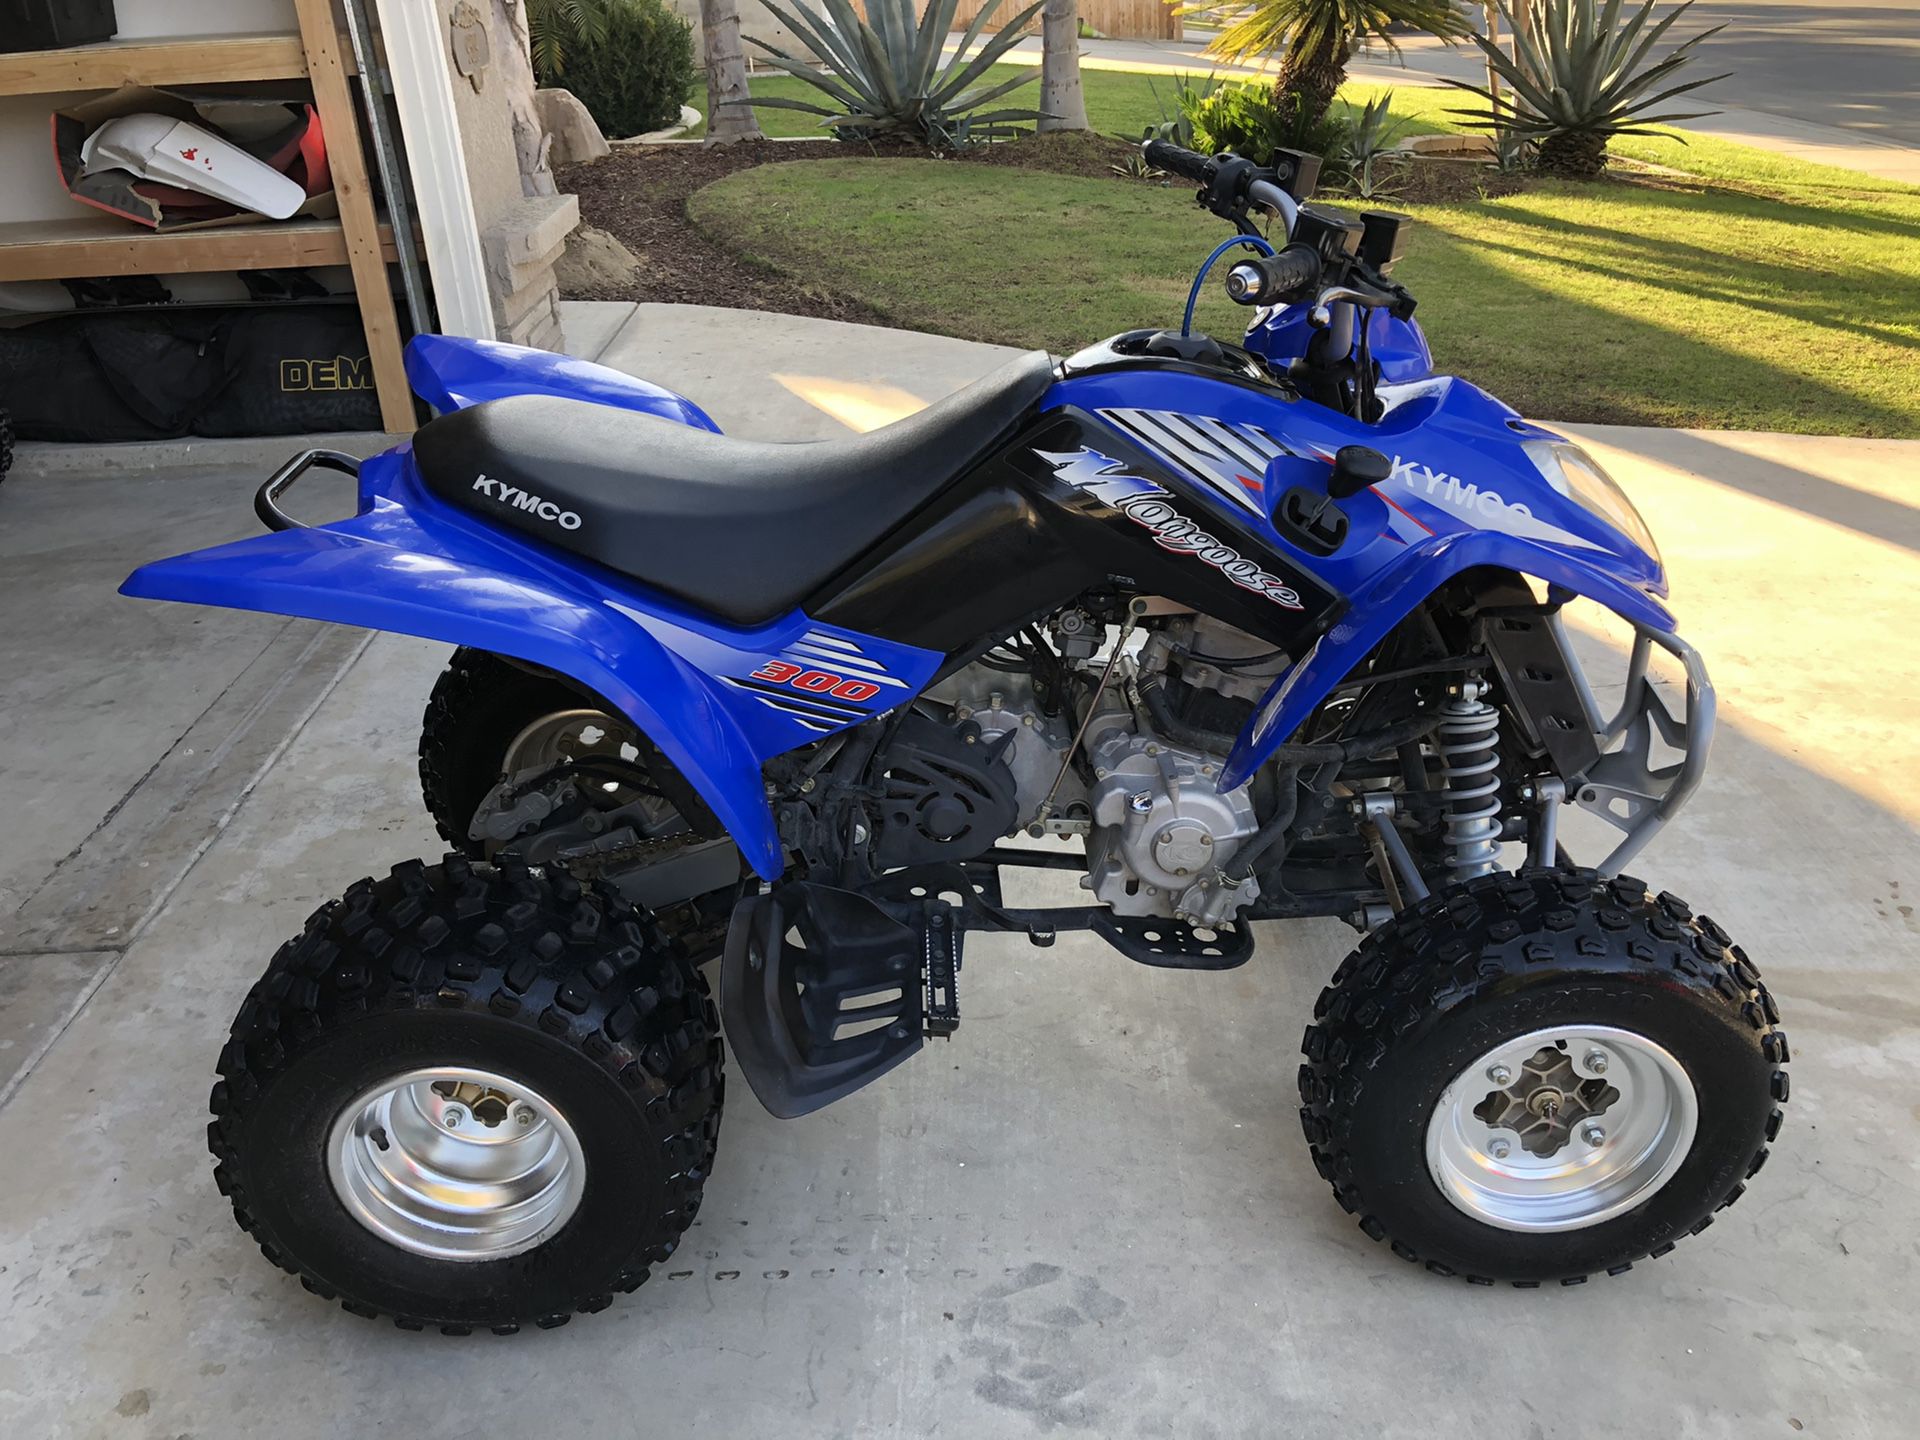 — 2007 Kymco mongoose 300 fully automatic